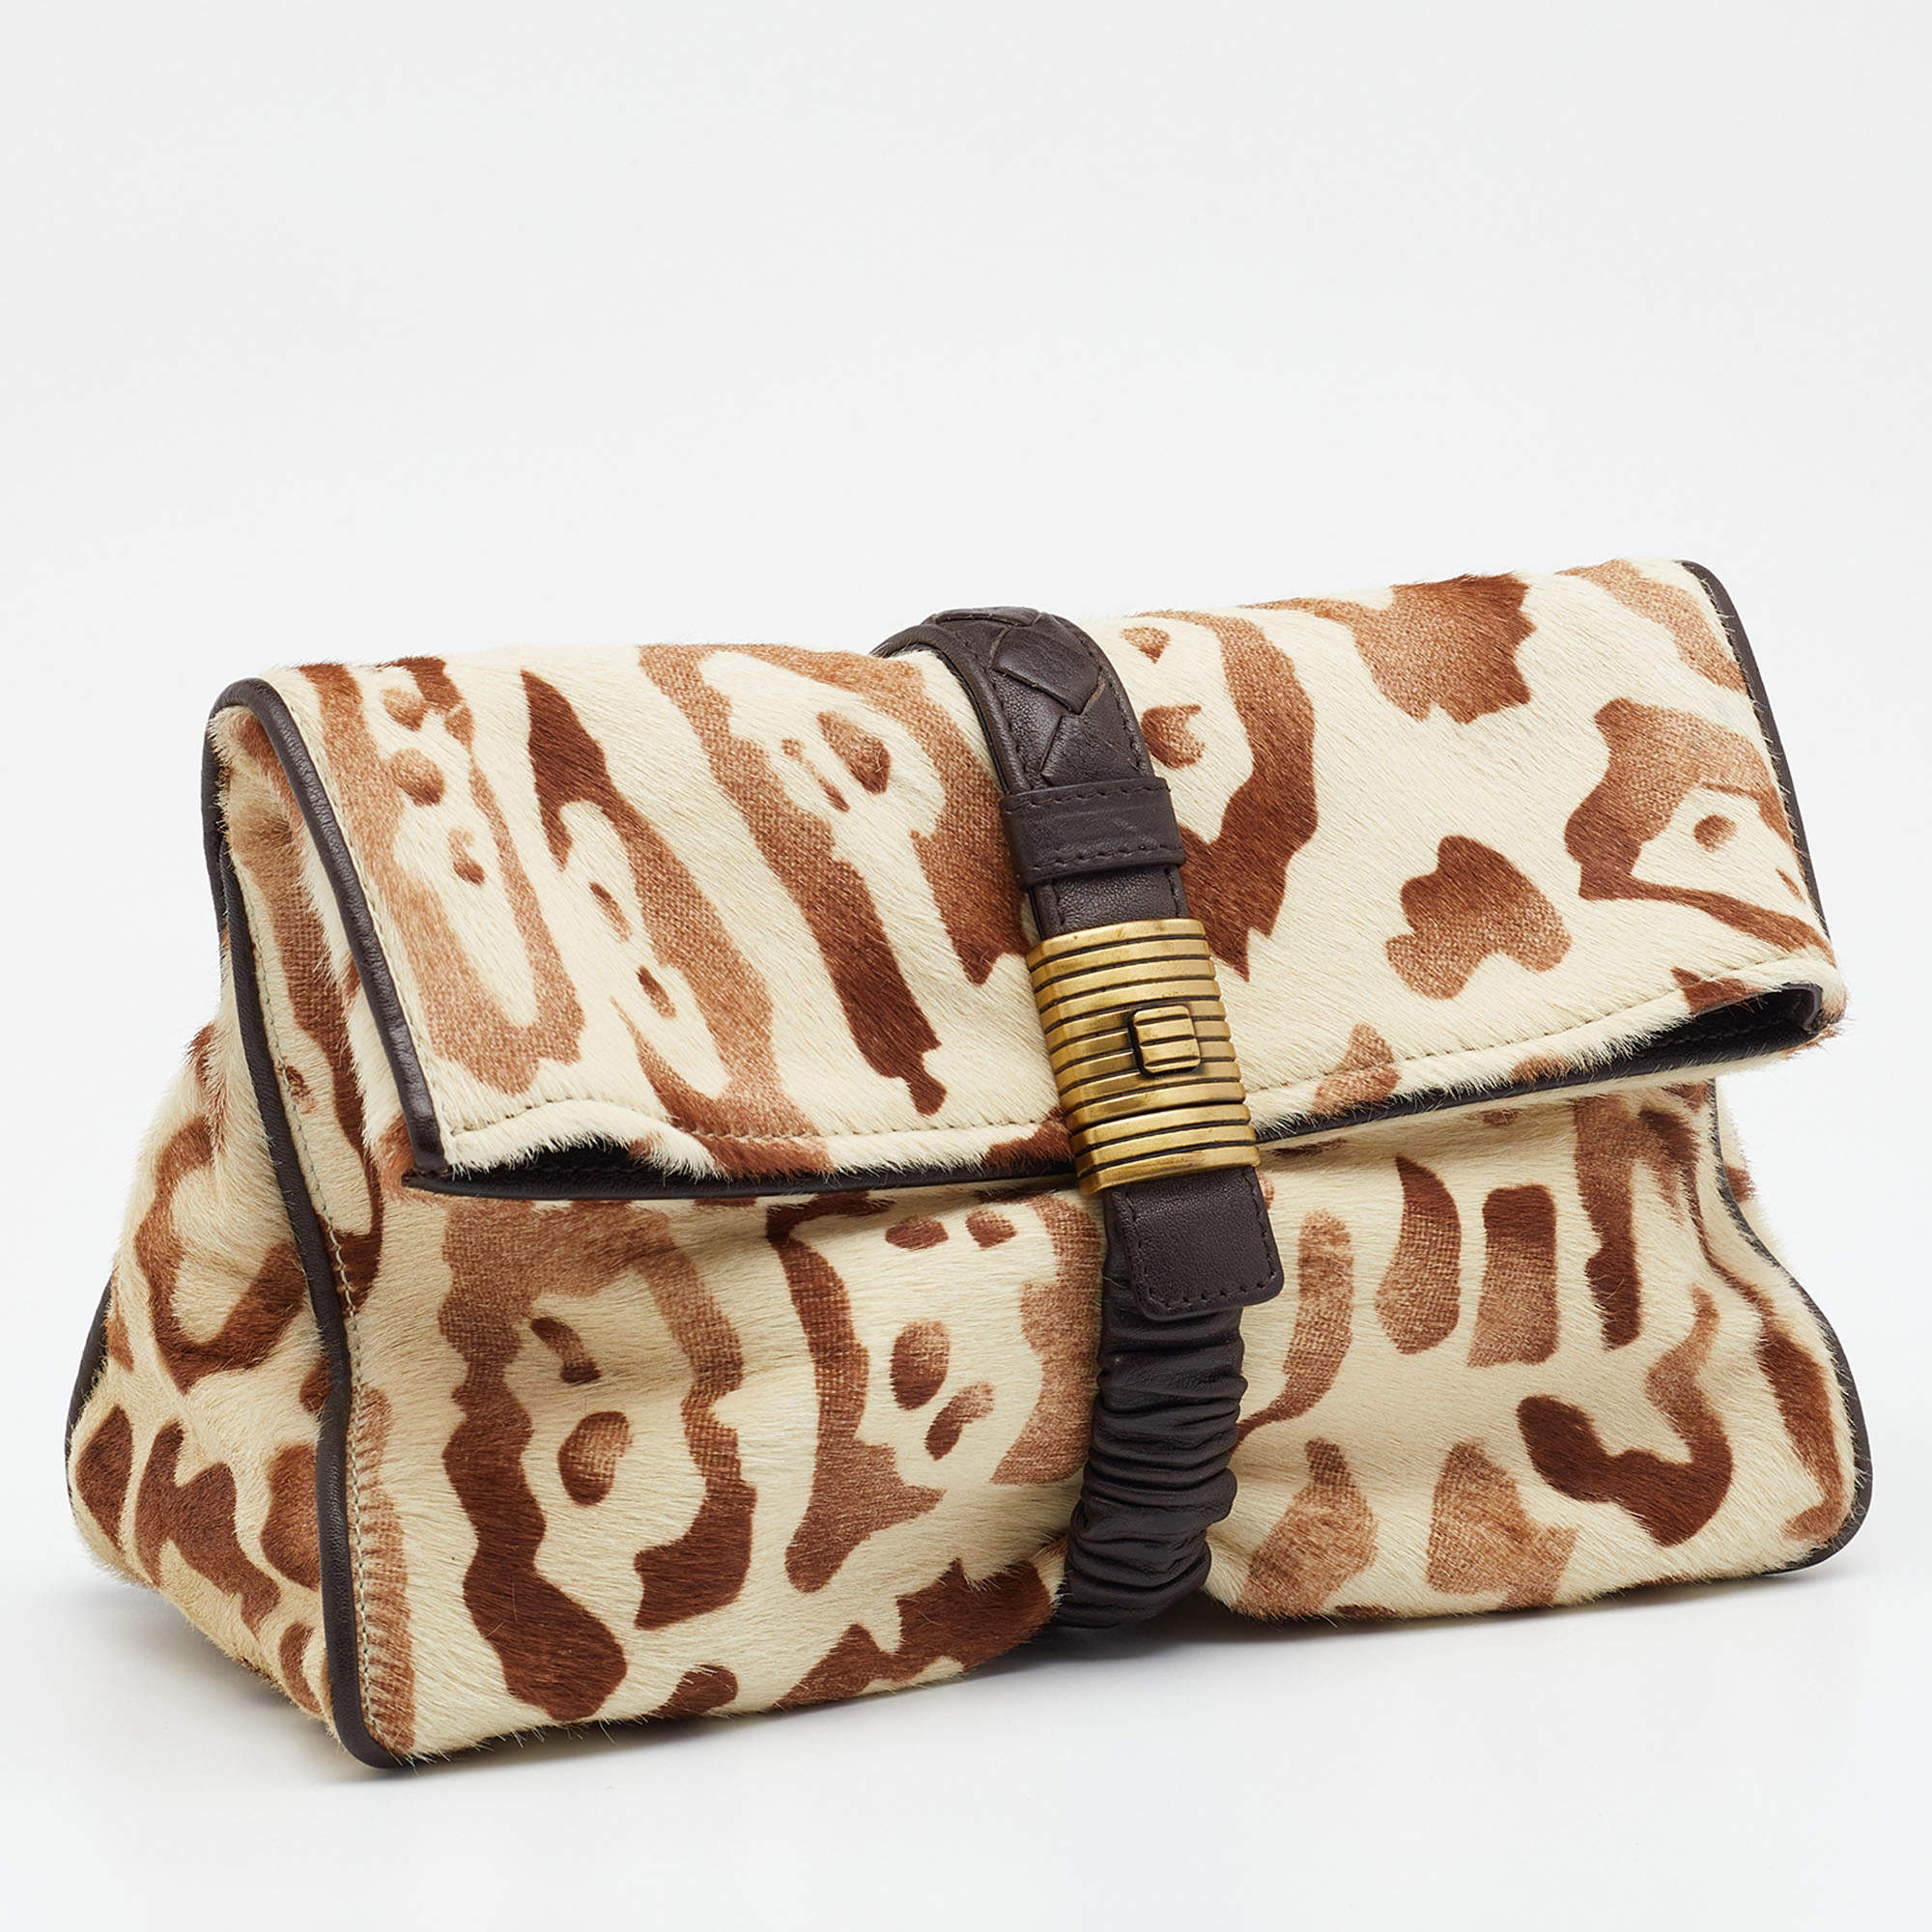 foldover lux printed leopard clutch featured at